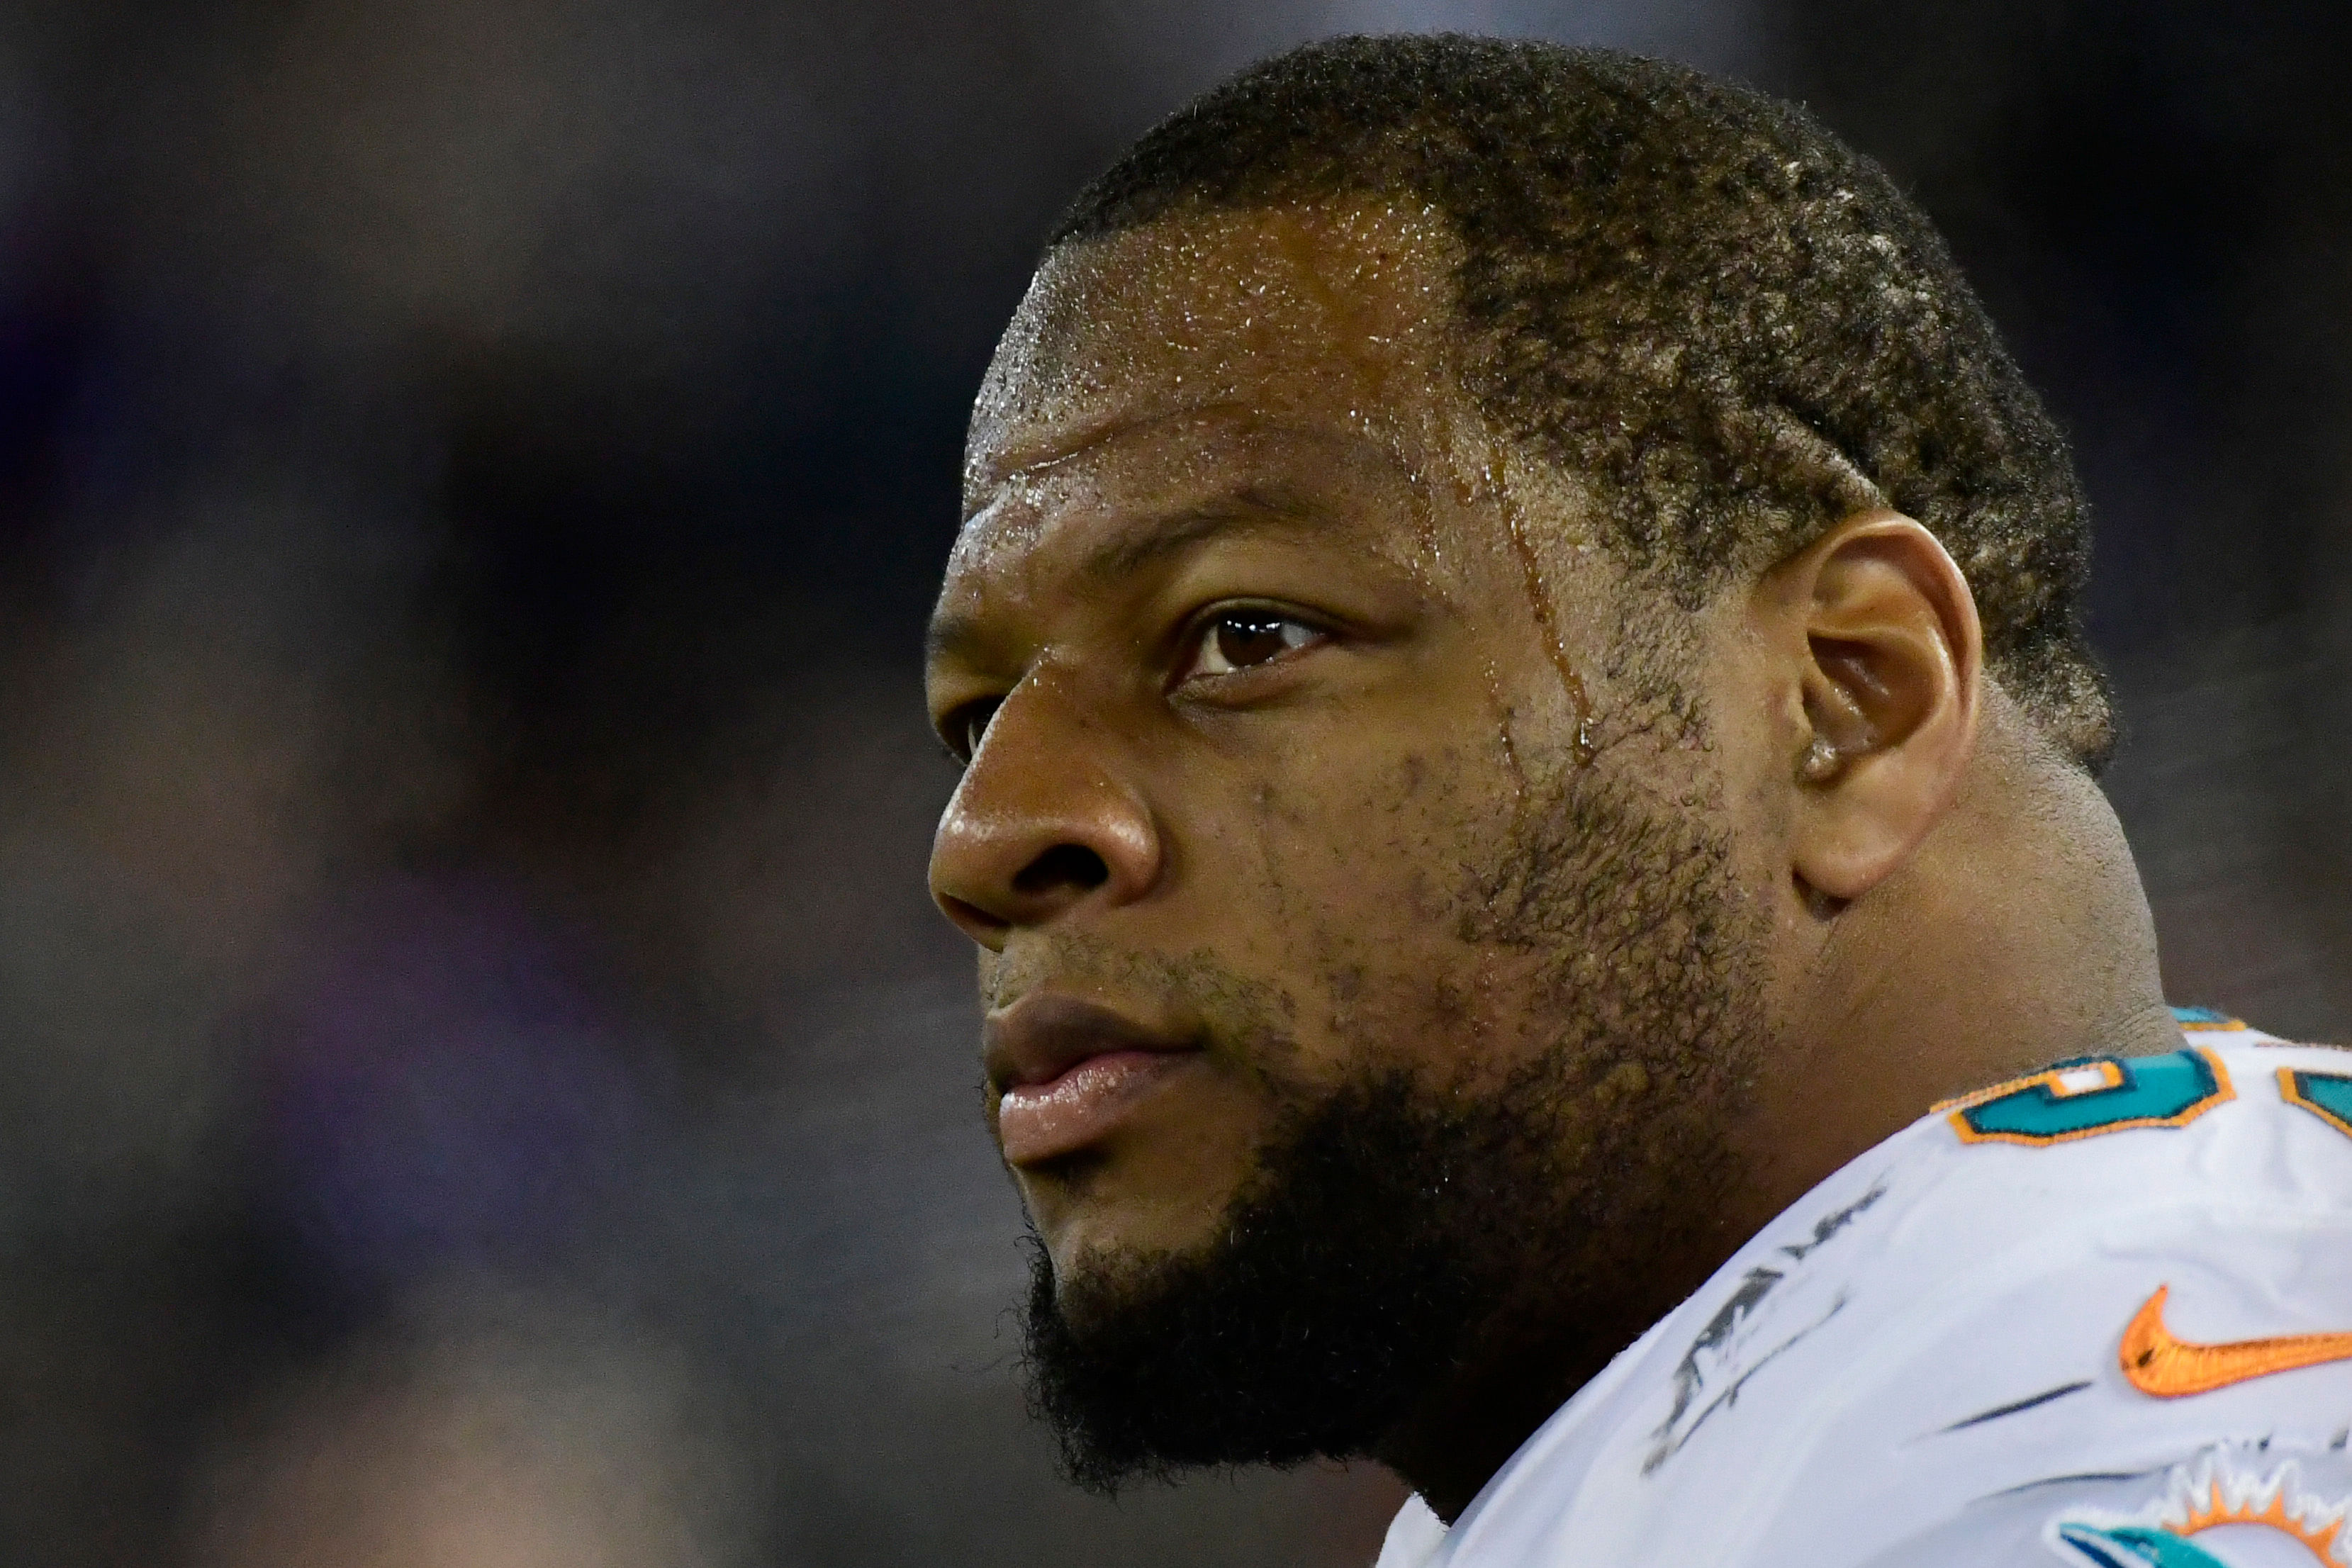 Former Miami Dolphins defensive tackle Ndamukong Suh